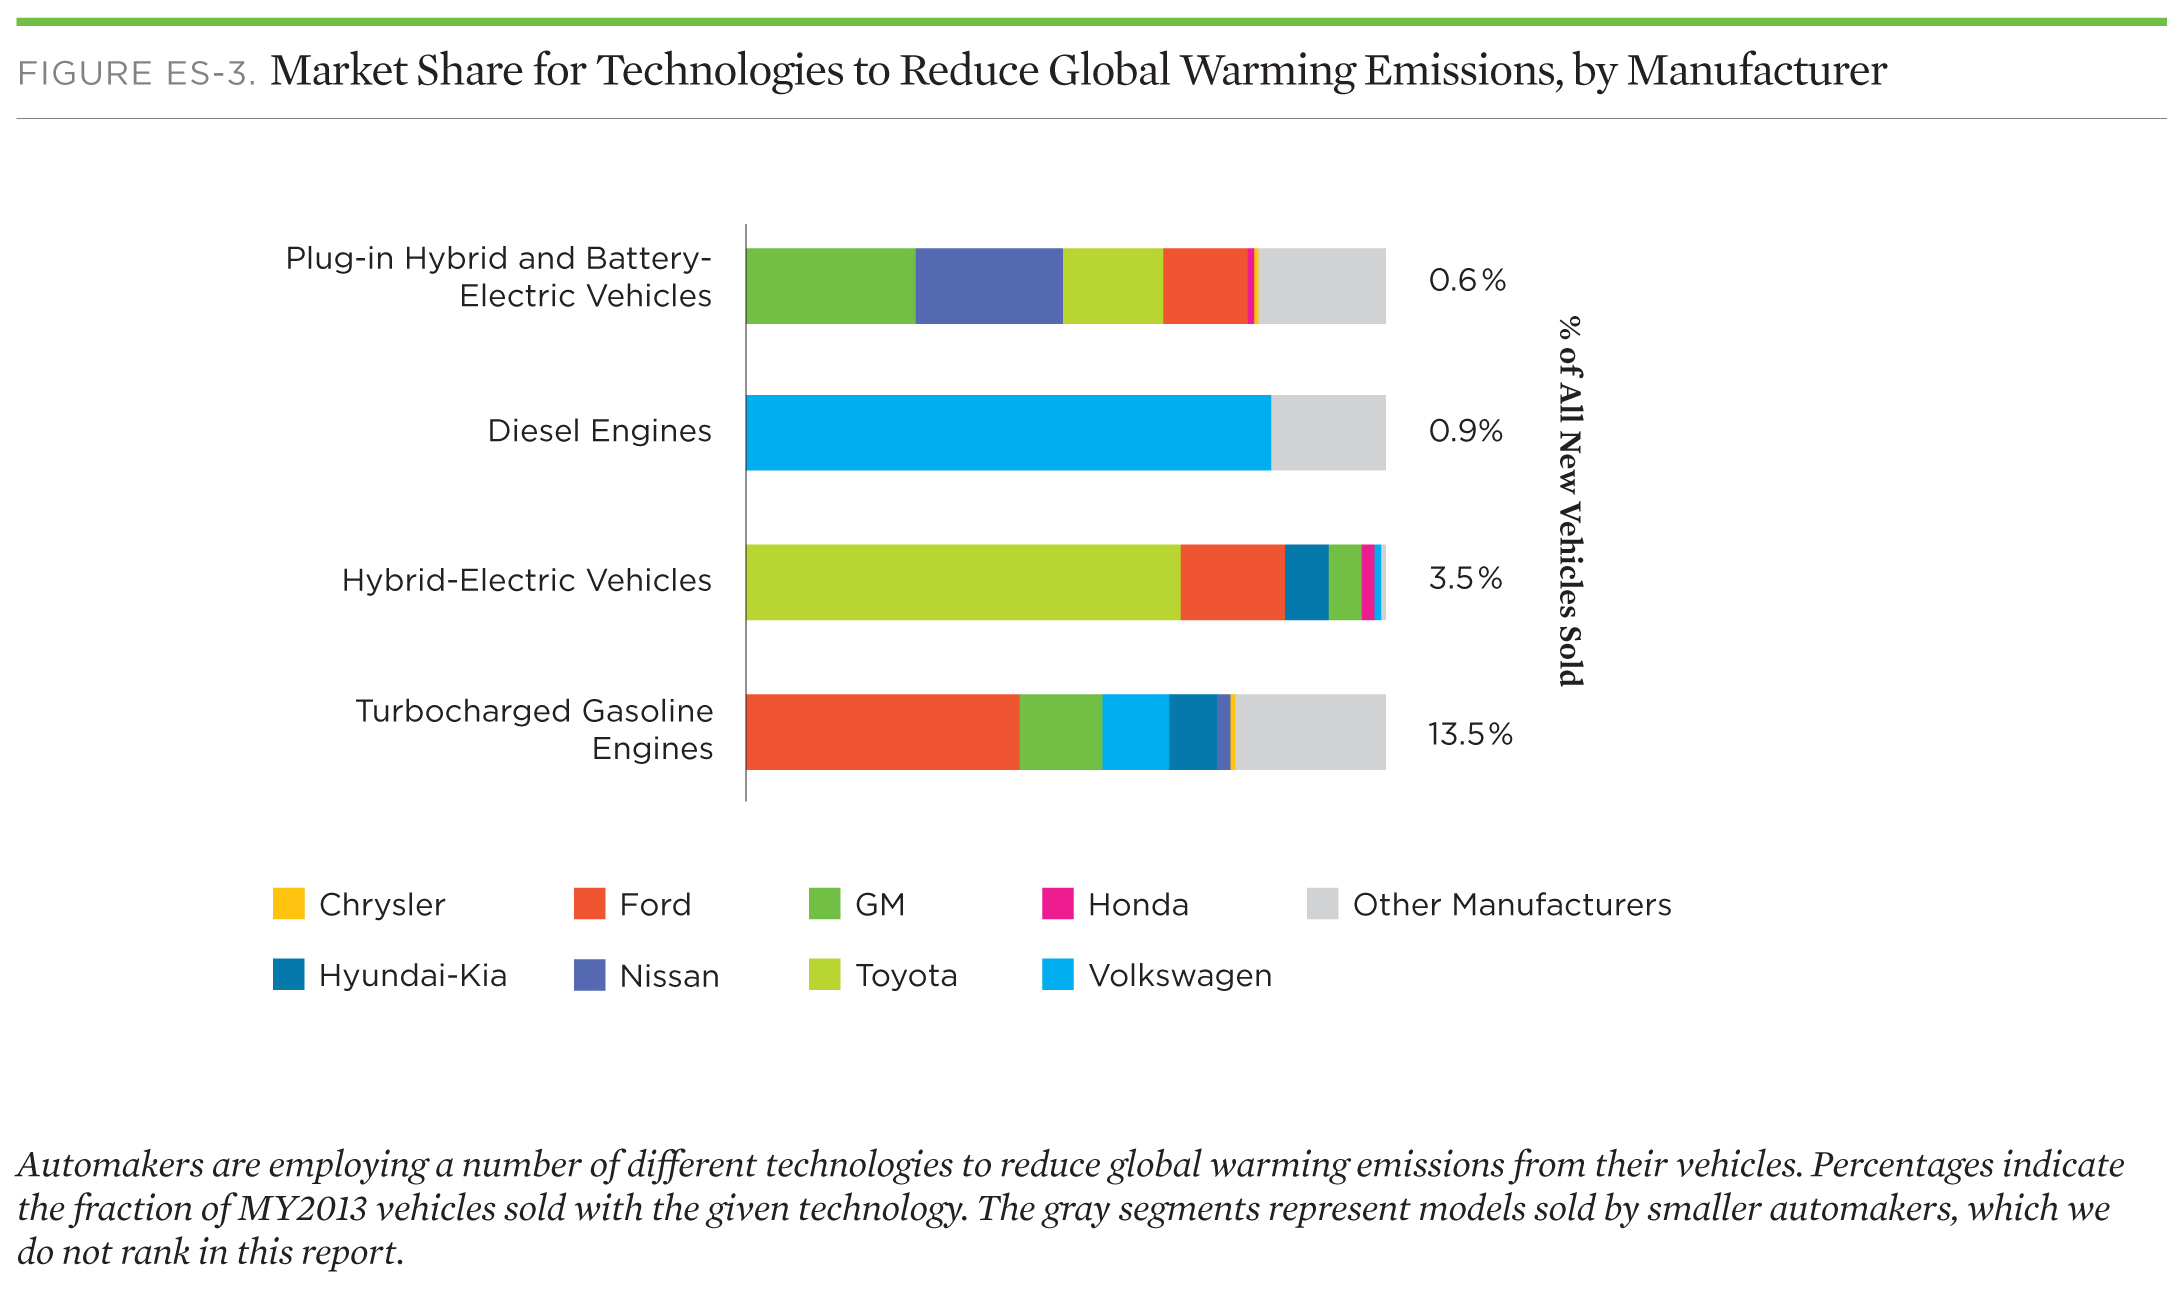 Automakers are employing a number of different technologies to reduce global warming emissions from their vehicles.